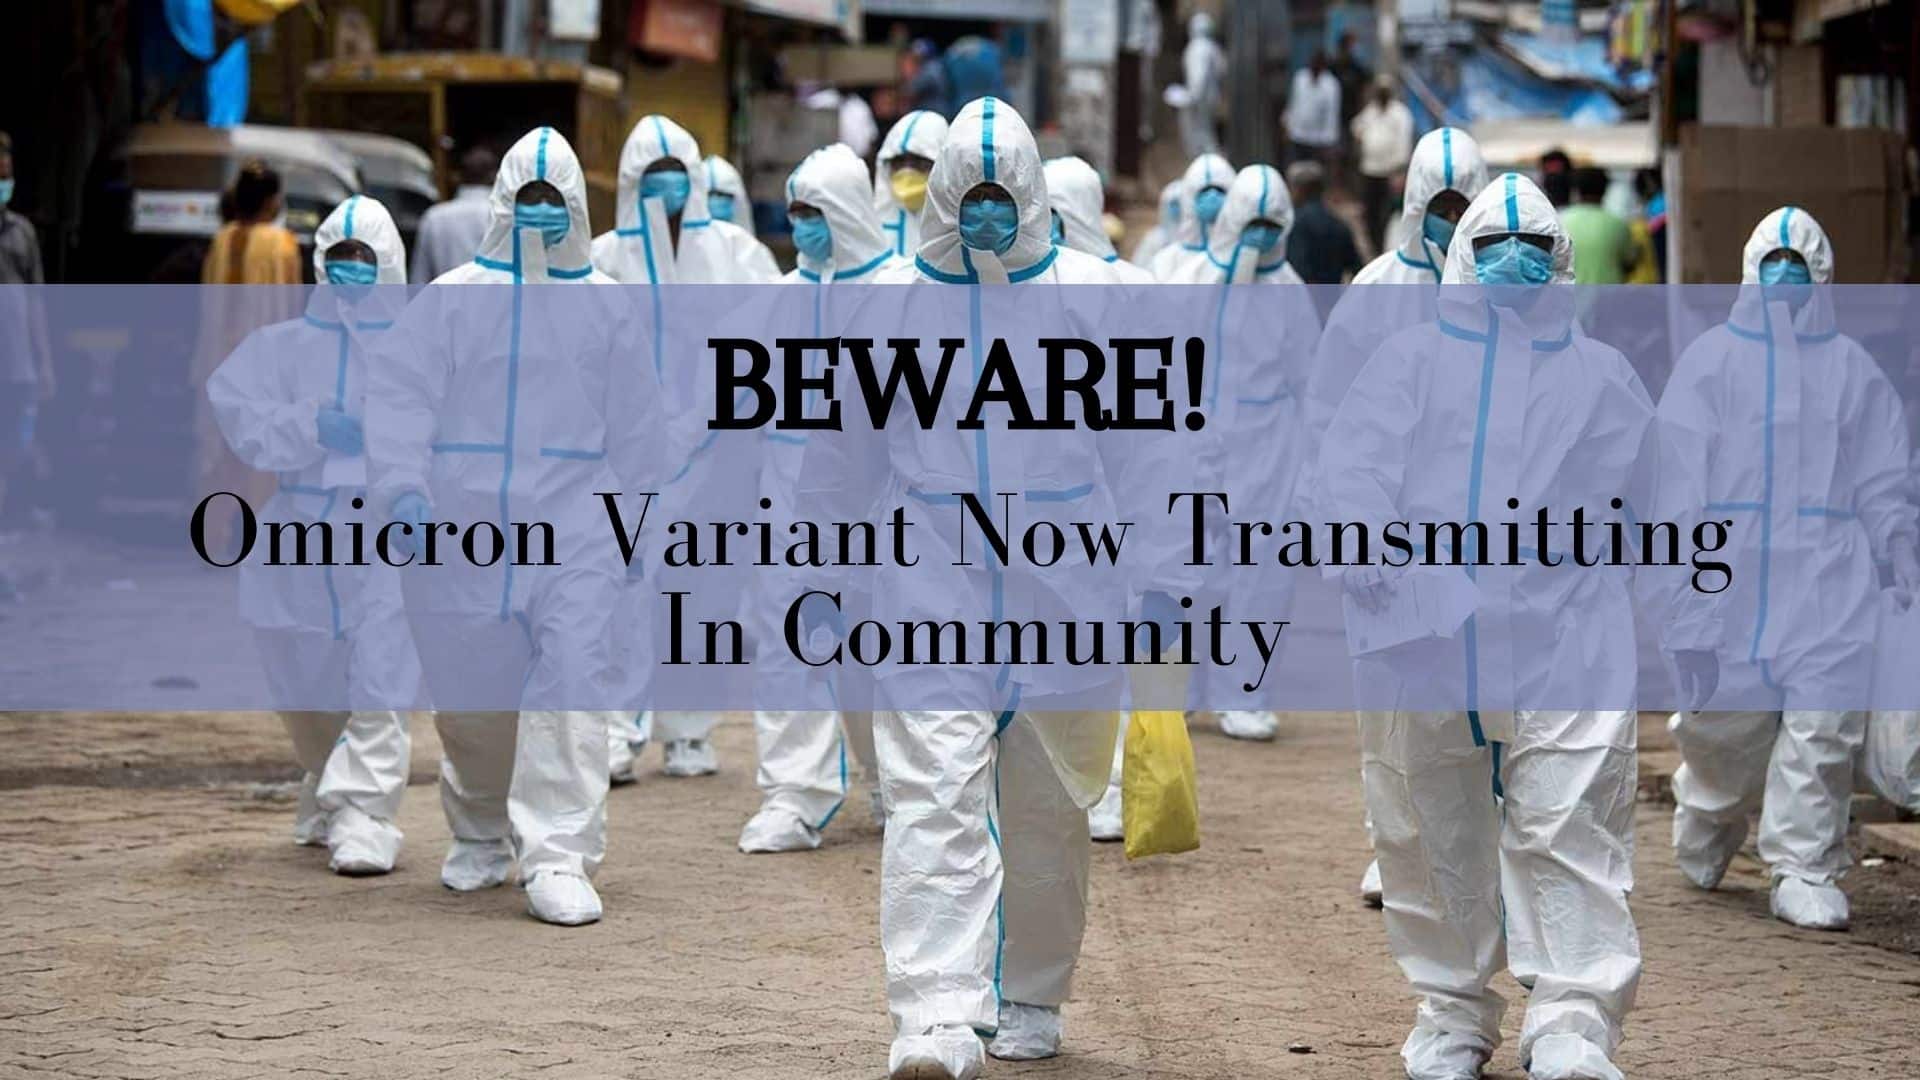 COVID-19 Live Updates: Omicron Variant Now Transmitting In Community, Dominant Strain In Metro Cities